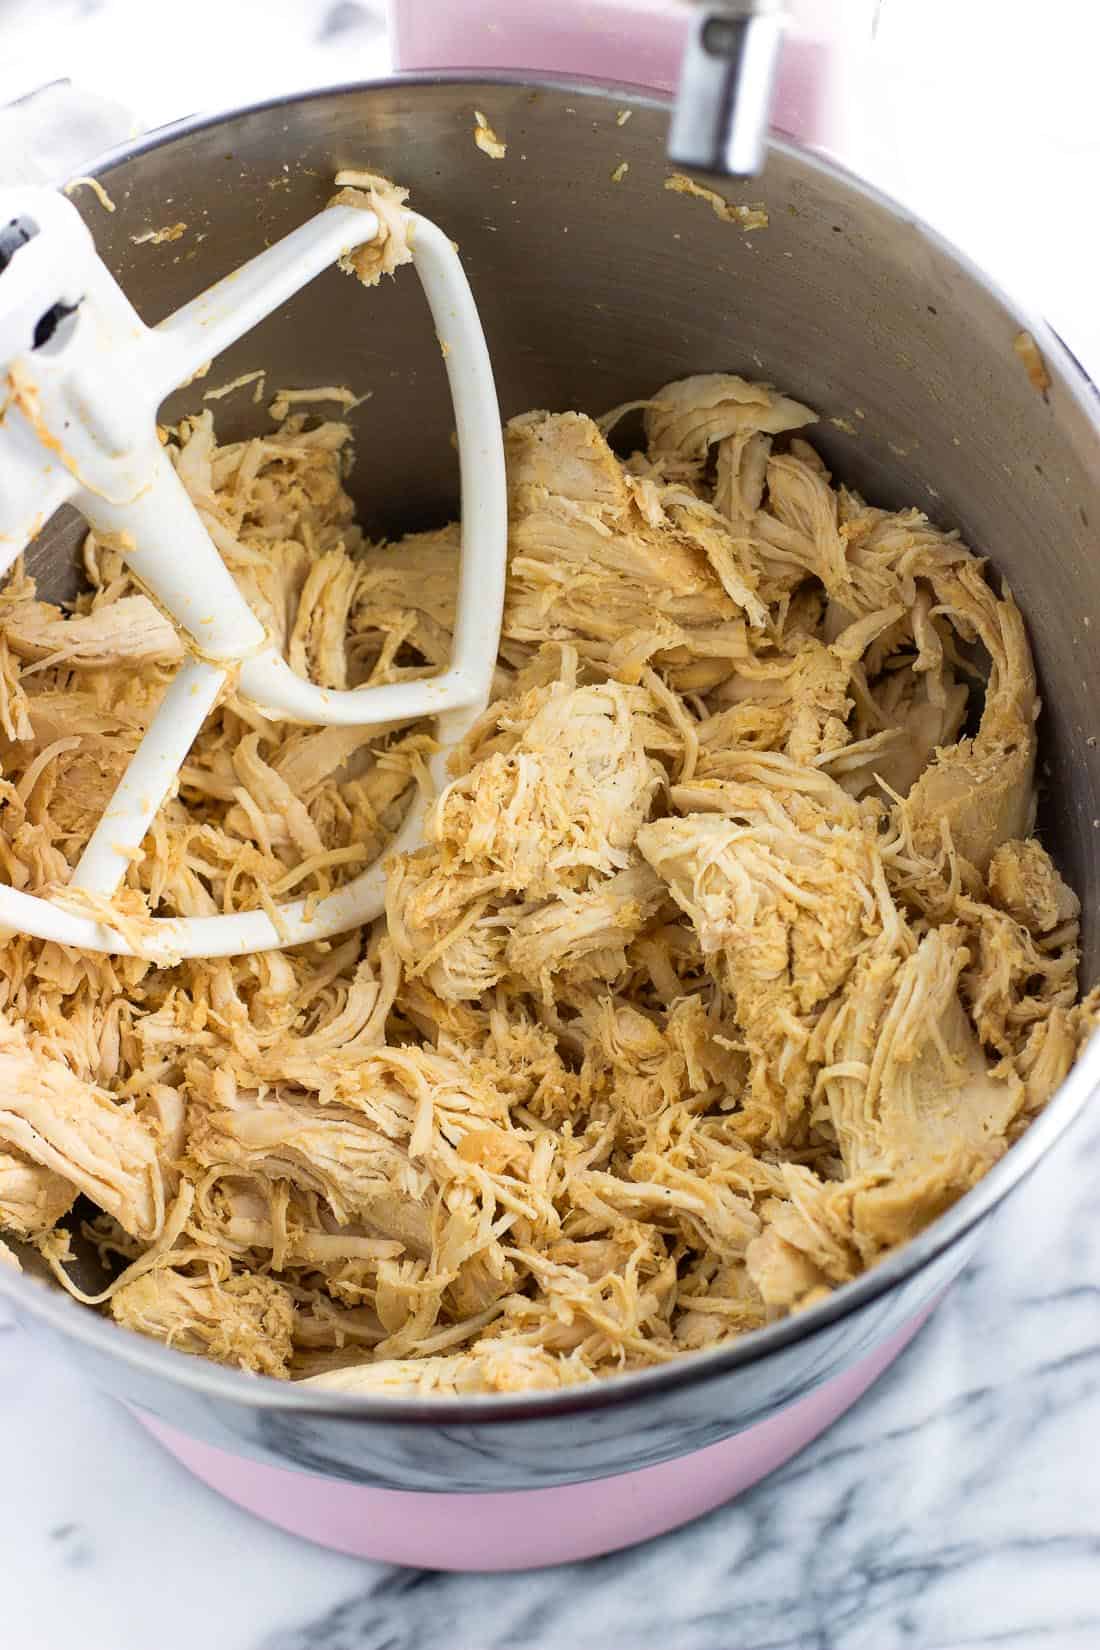 A metal stand mixer bowl filled with shredded chicken and the paddle attachment.